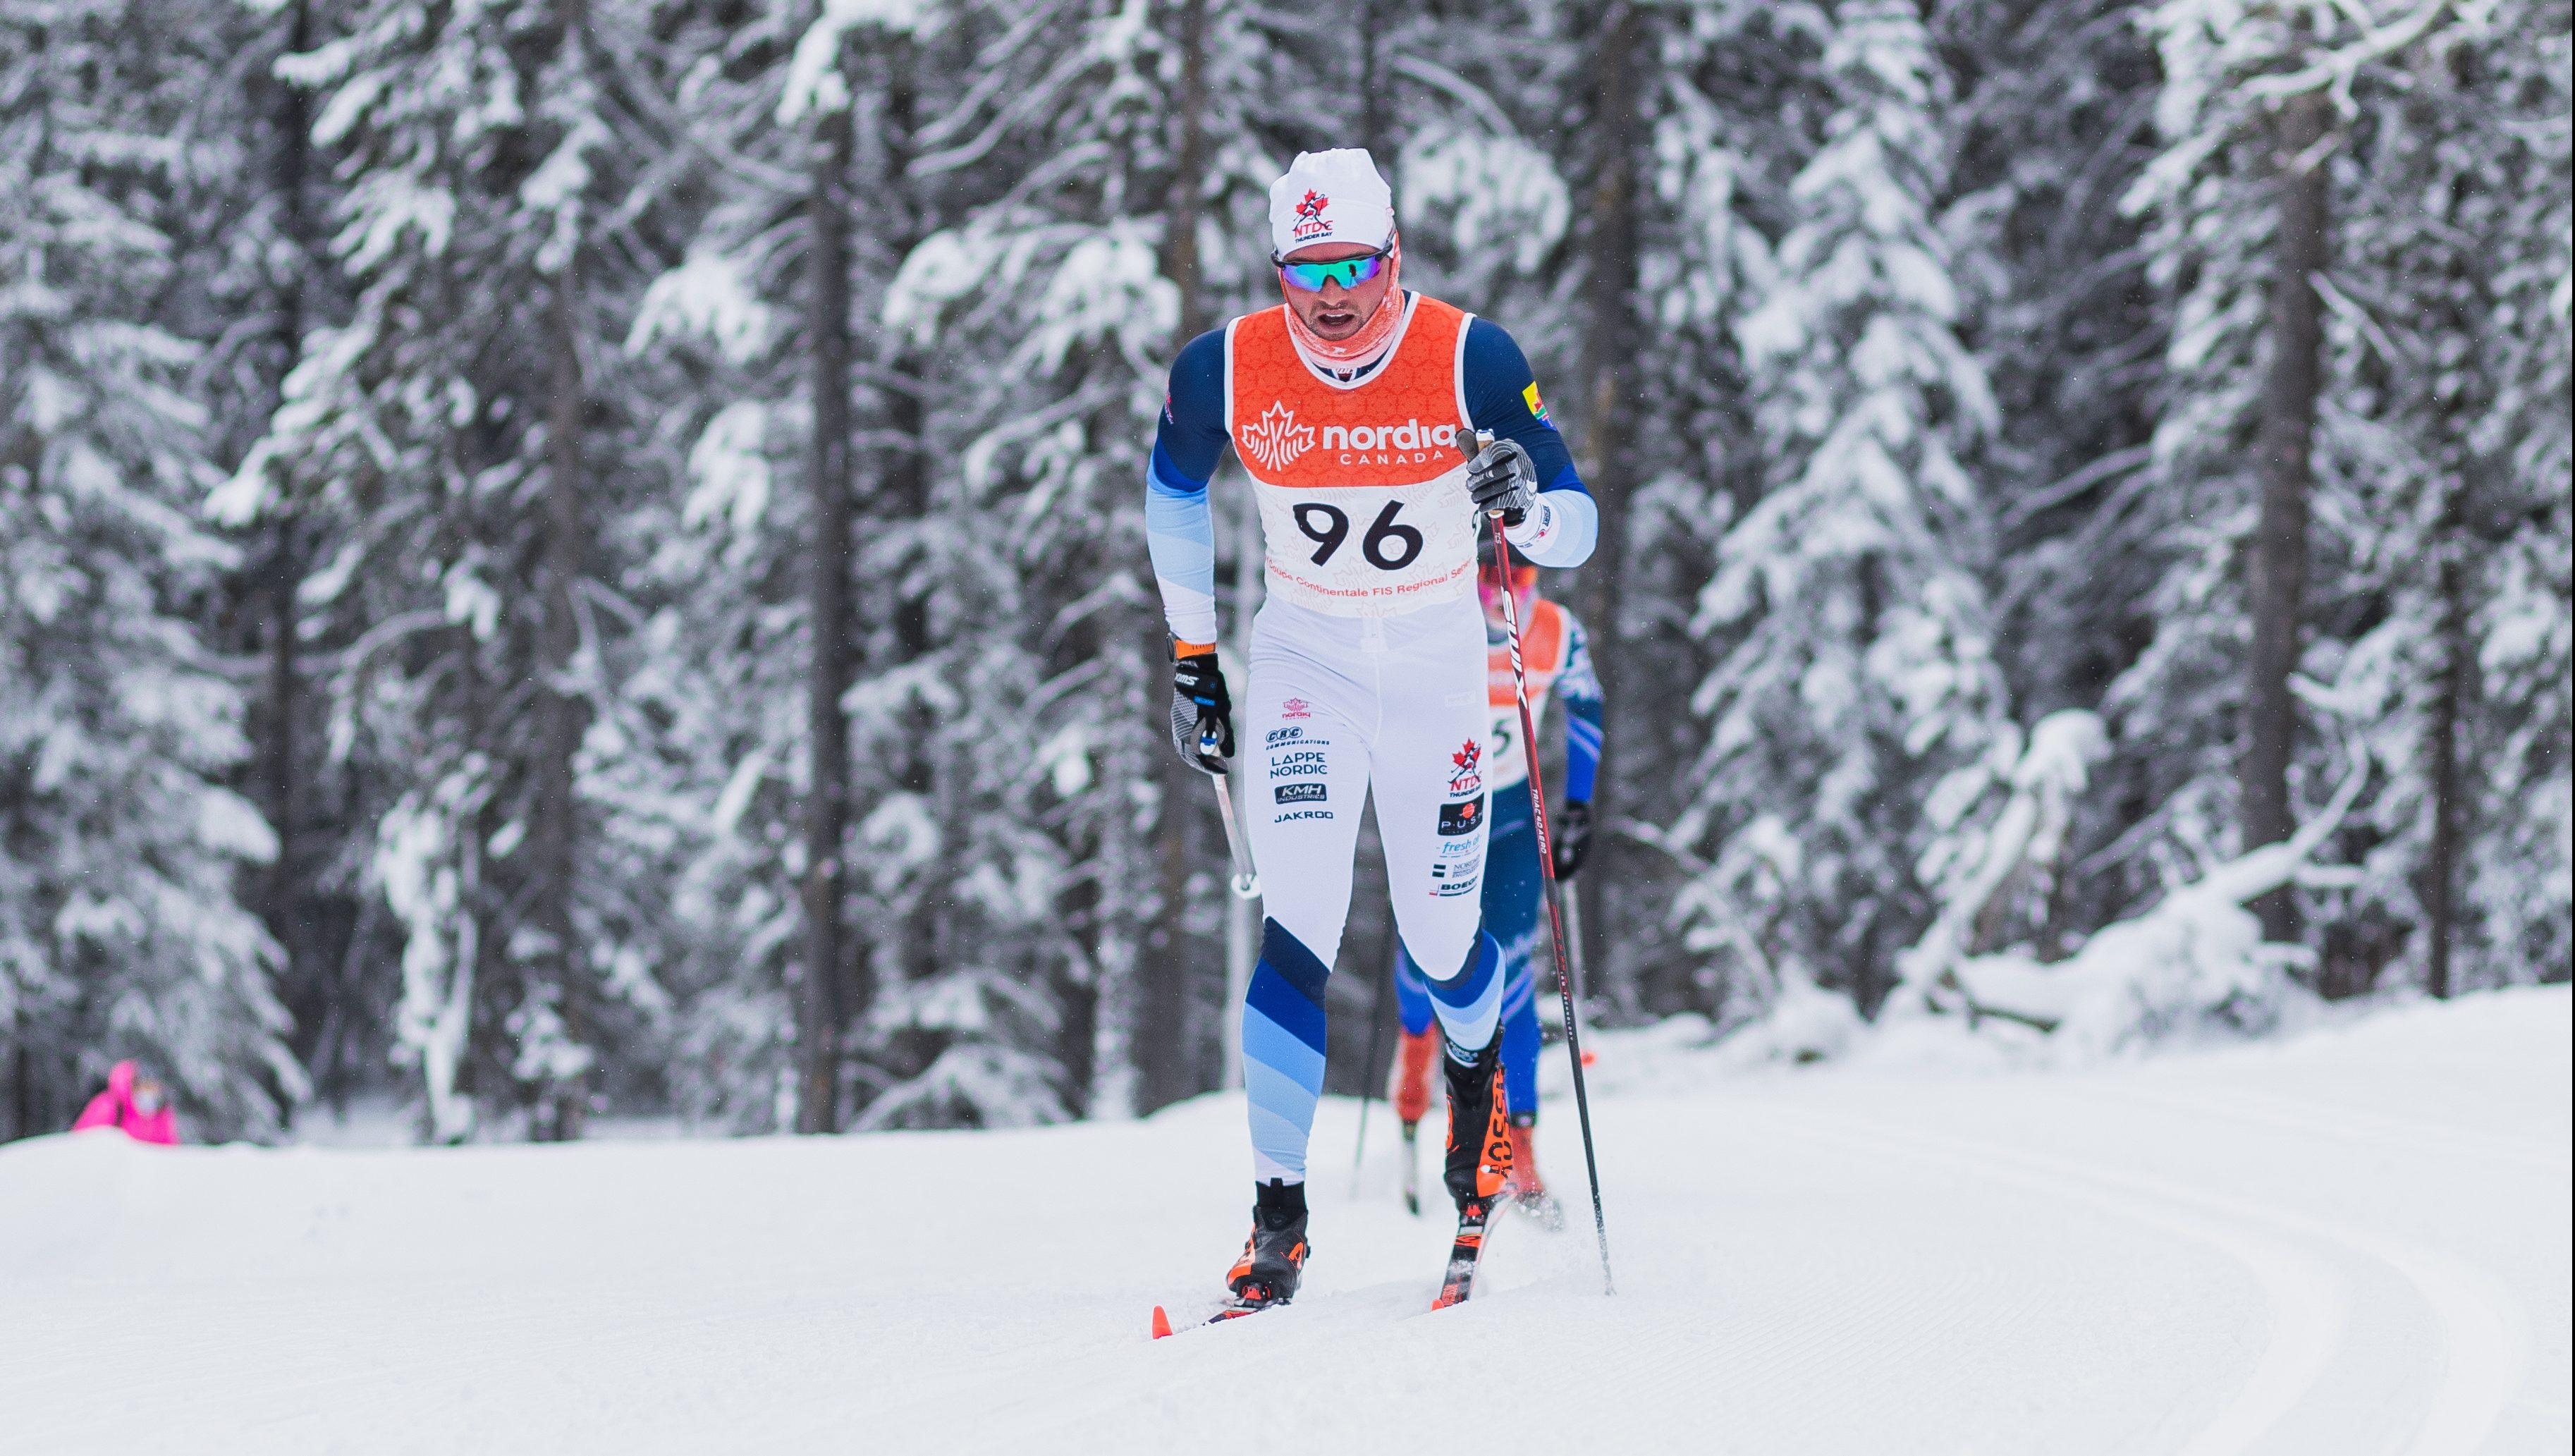 Male athlete is skiing during a cross country race.